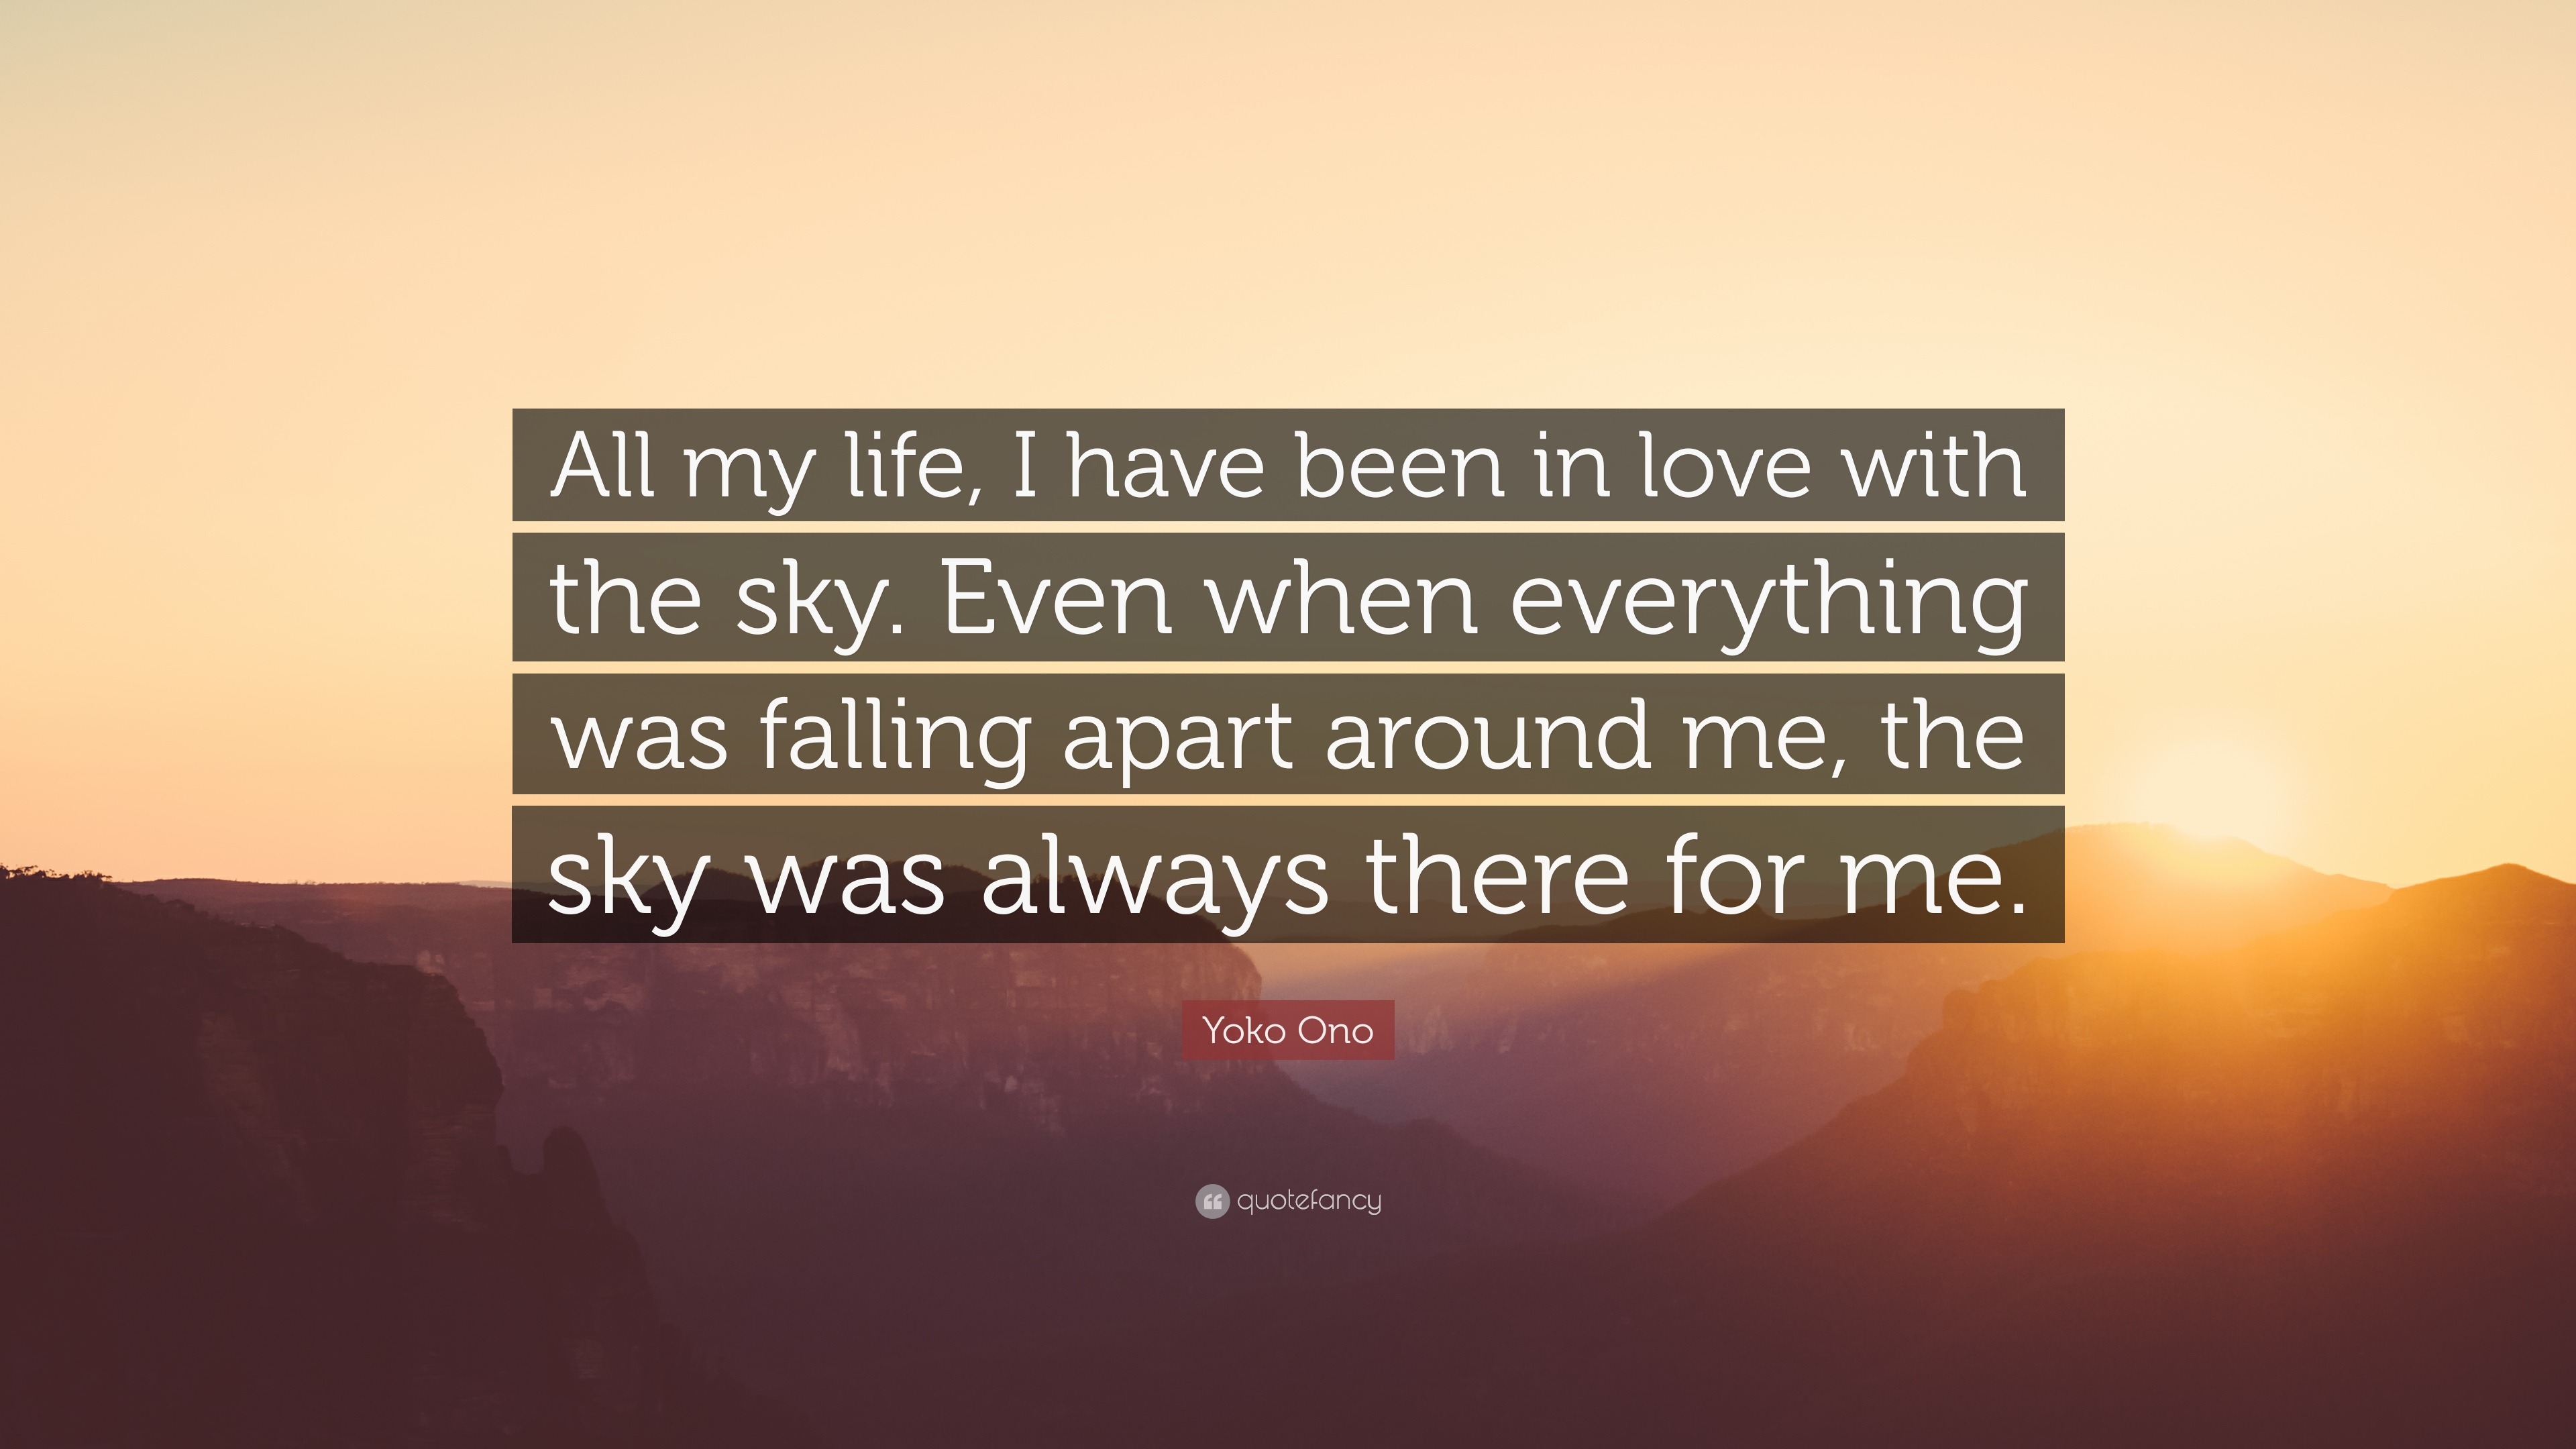 Yoko o Quote “All my life I have been in love with the